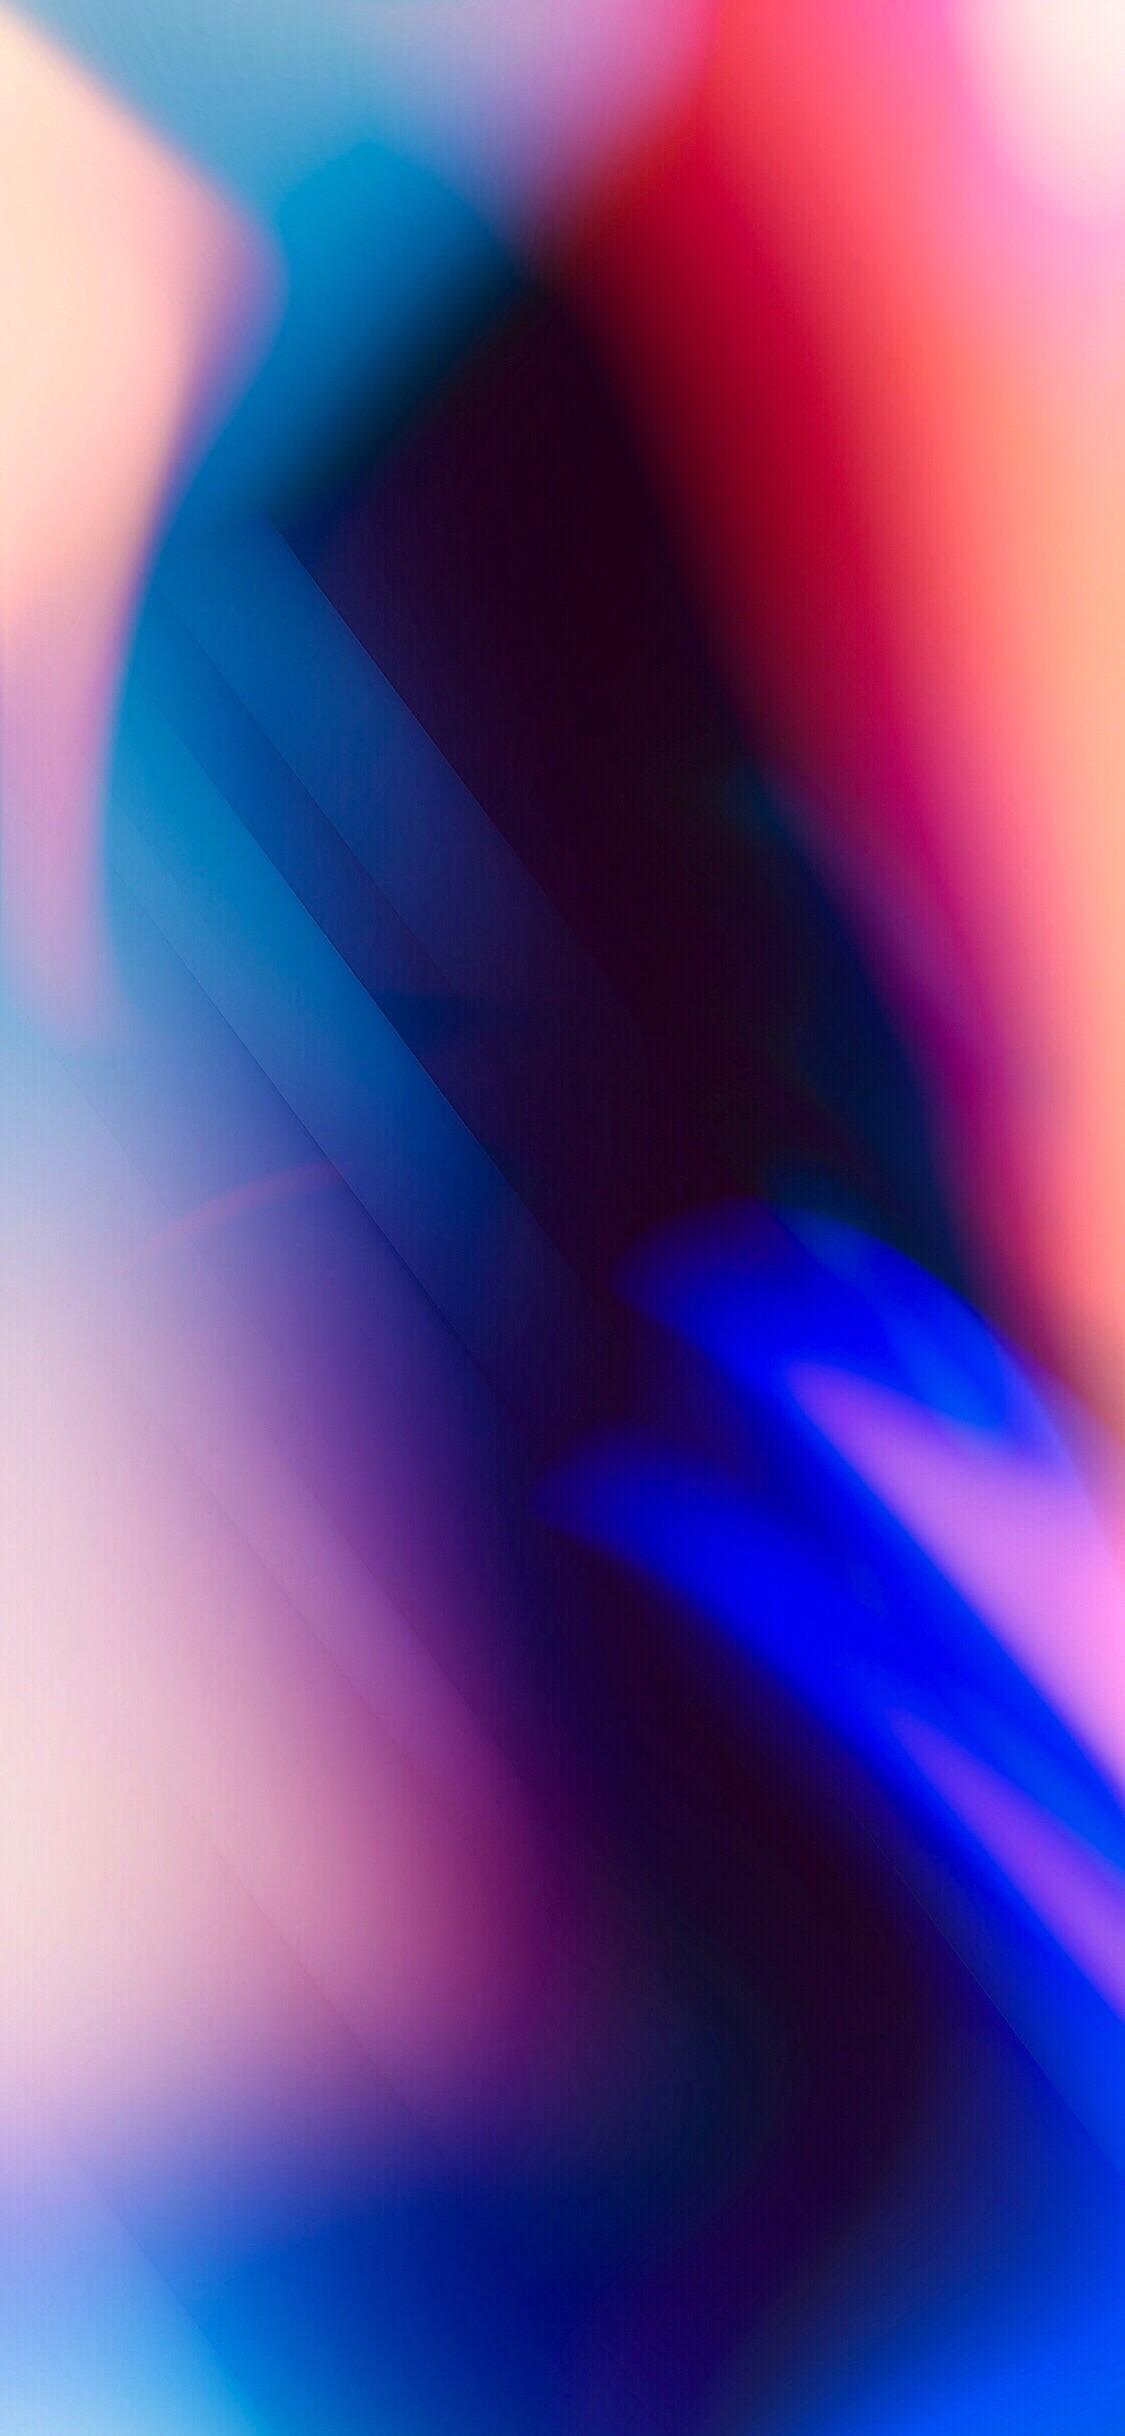 Credit goes to AR72014. He makes really nice wallpaper, especially for iPhone X